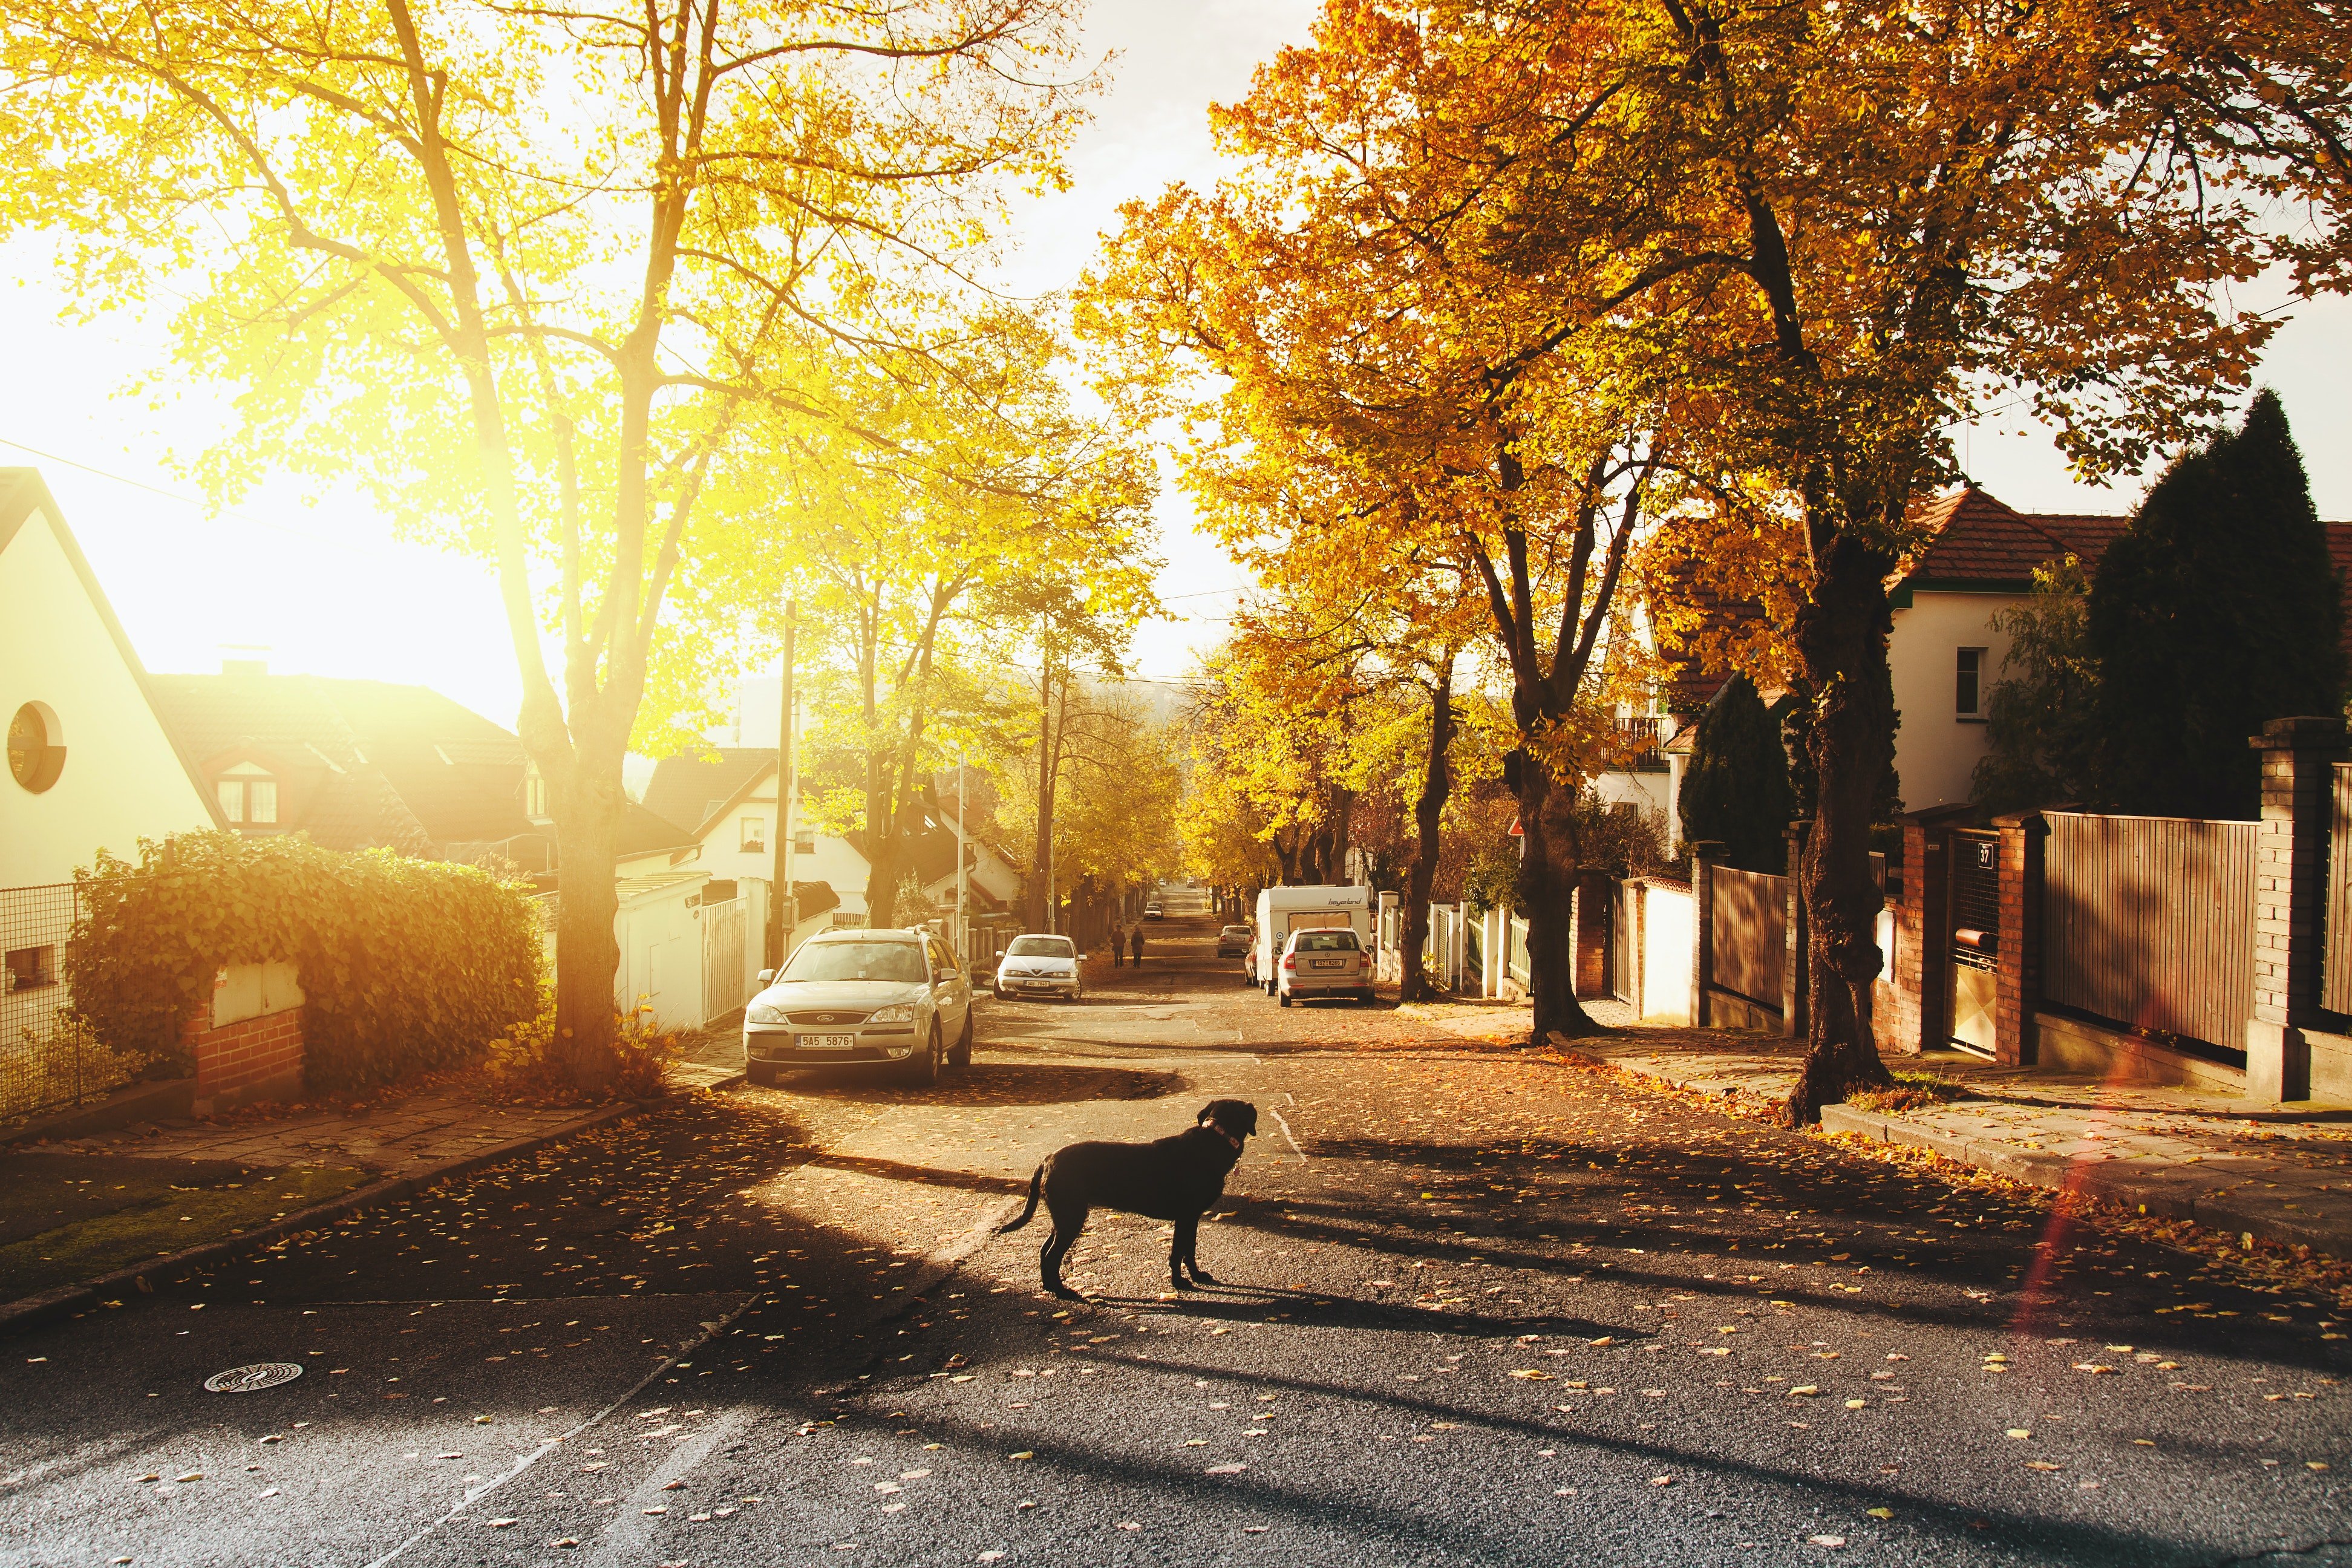 A dog in the middle of a street | Photo: Pexels